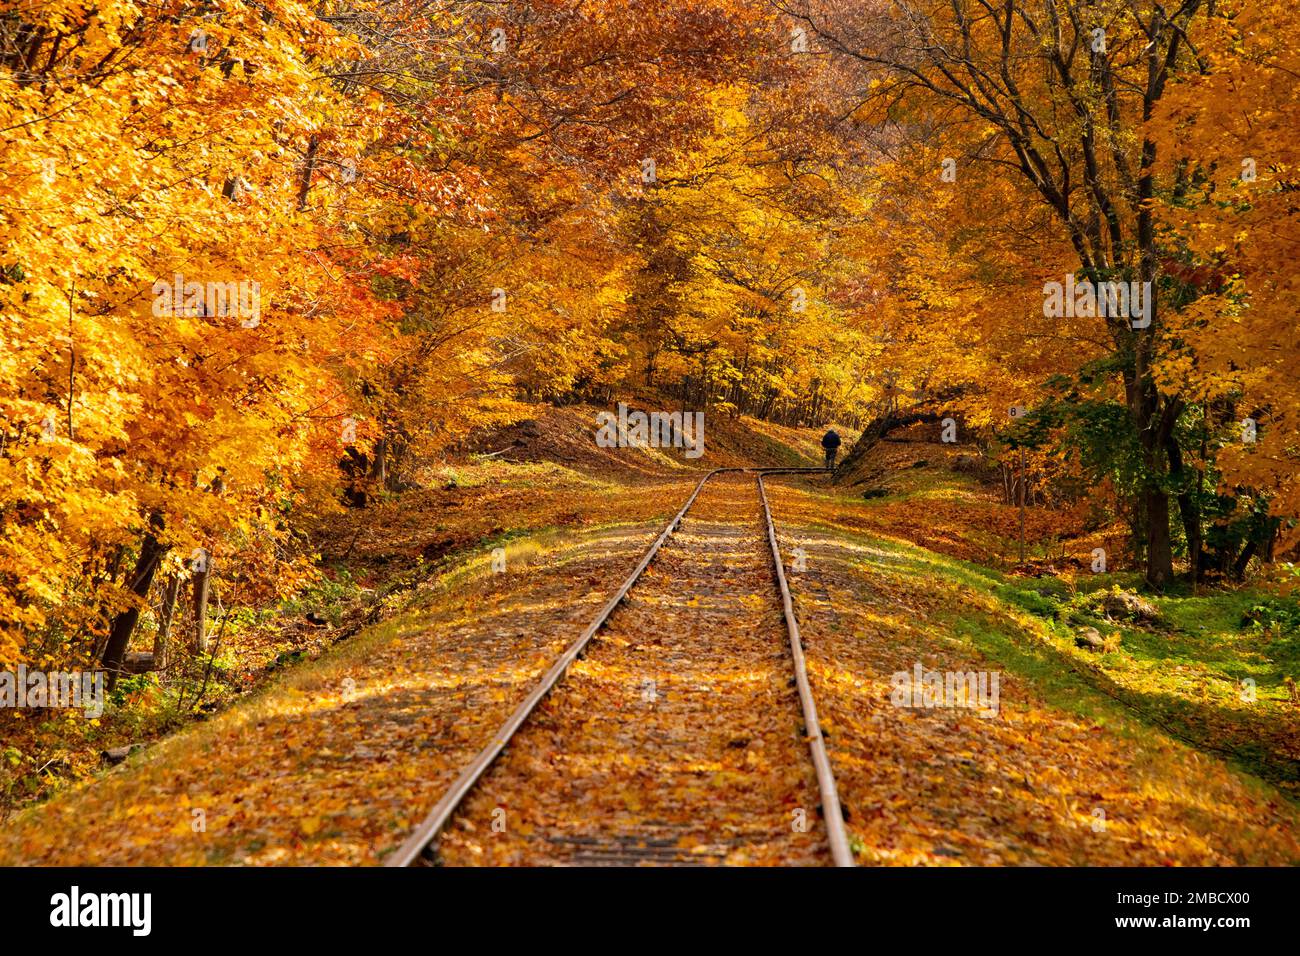 A hiker on the railway tracks in autumn. Stock Photo